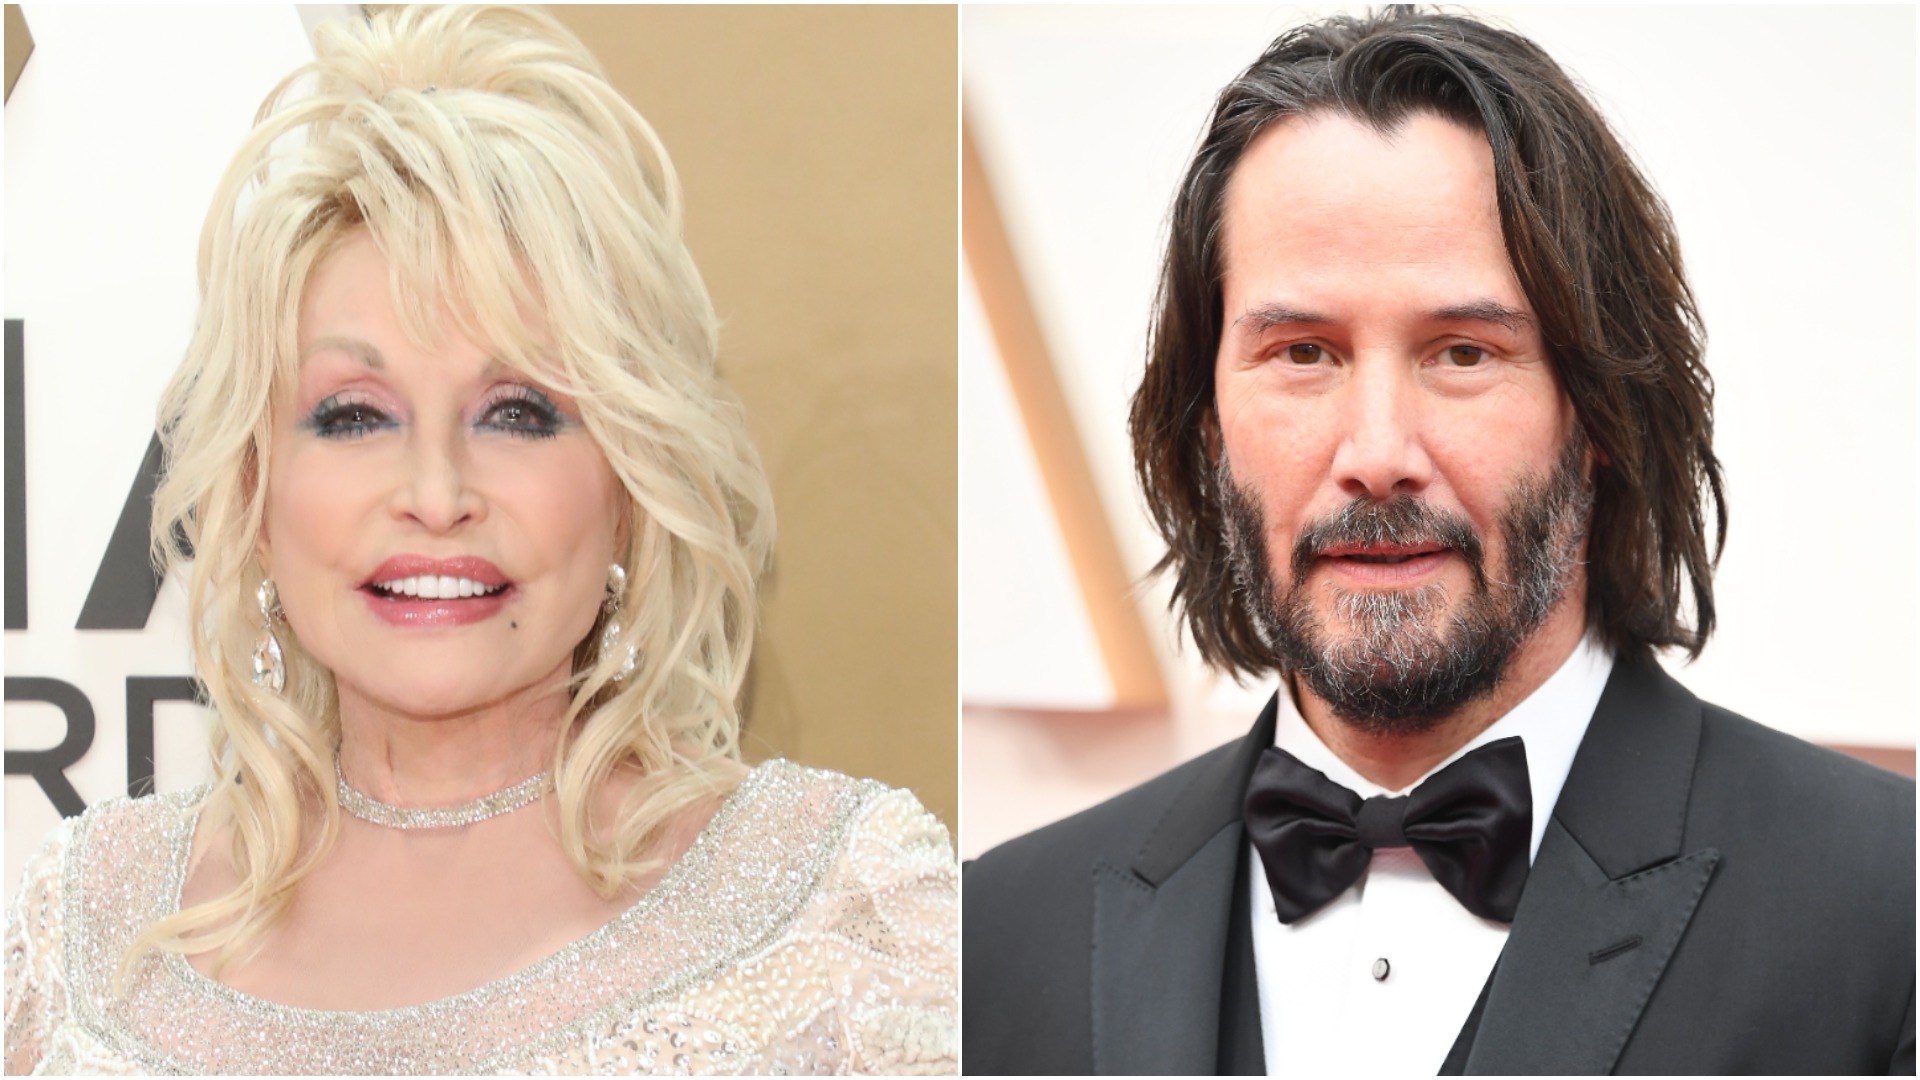 A collage image of Dolly Parton and Keanu Reeves attending separate events 